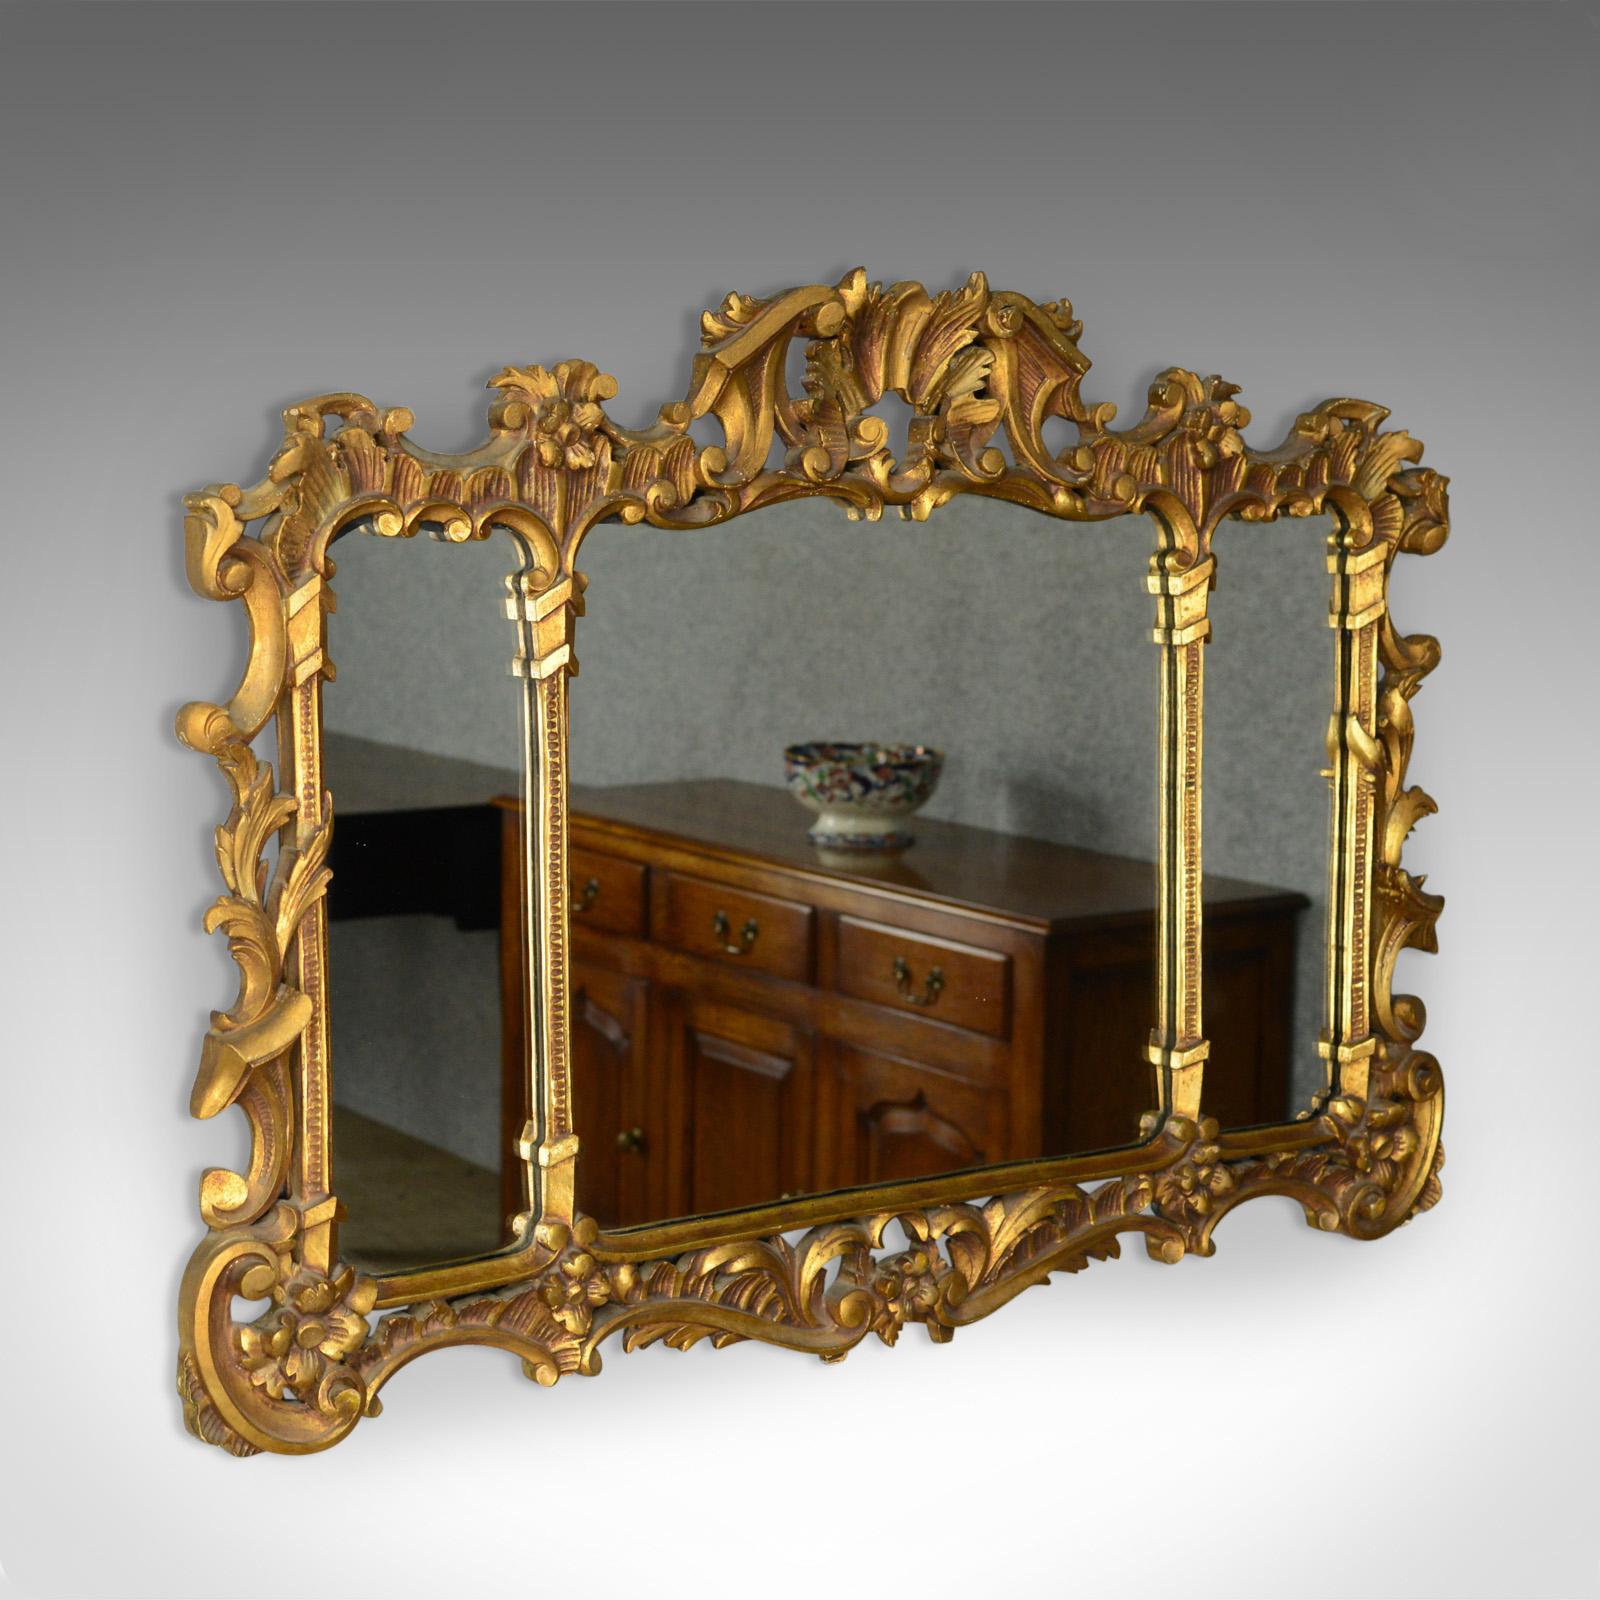 This is an antique overmantel mirror. An English, Regency revival, giltwood wall mirror divided as with a triptych and dating to circa 1900.

Attractive mellow golden tones in the giltwood frame
A quality piece in the Regency taste
Mid-sized and